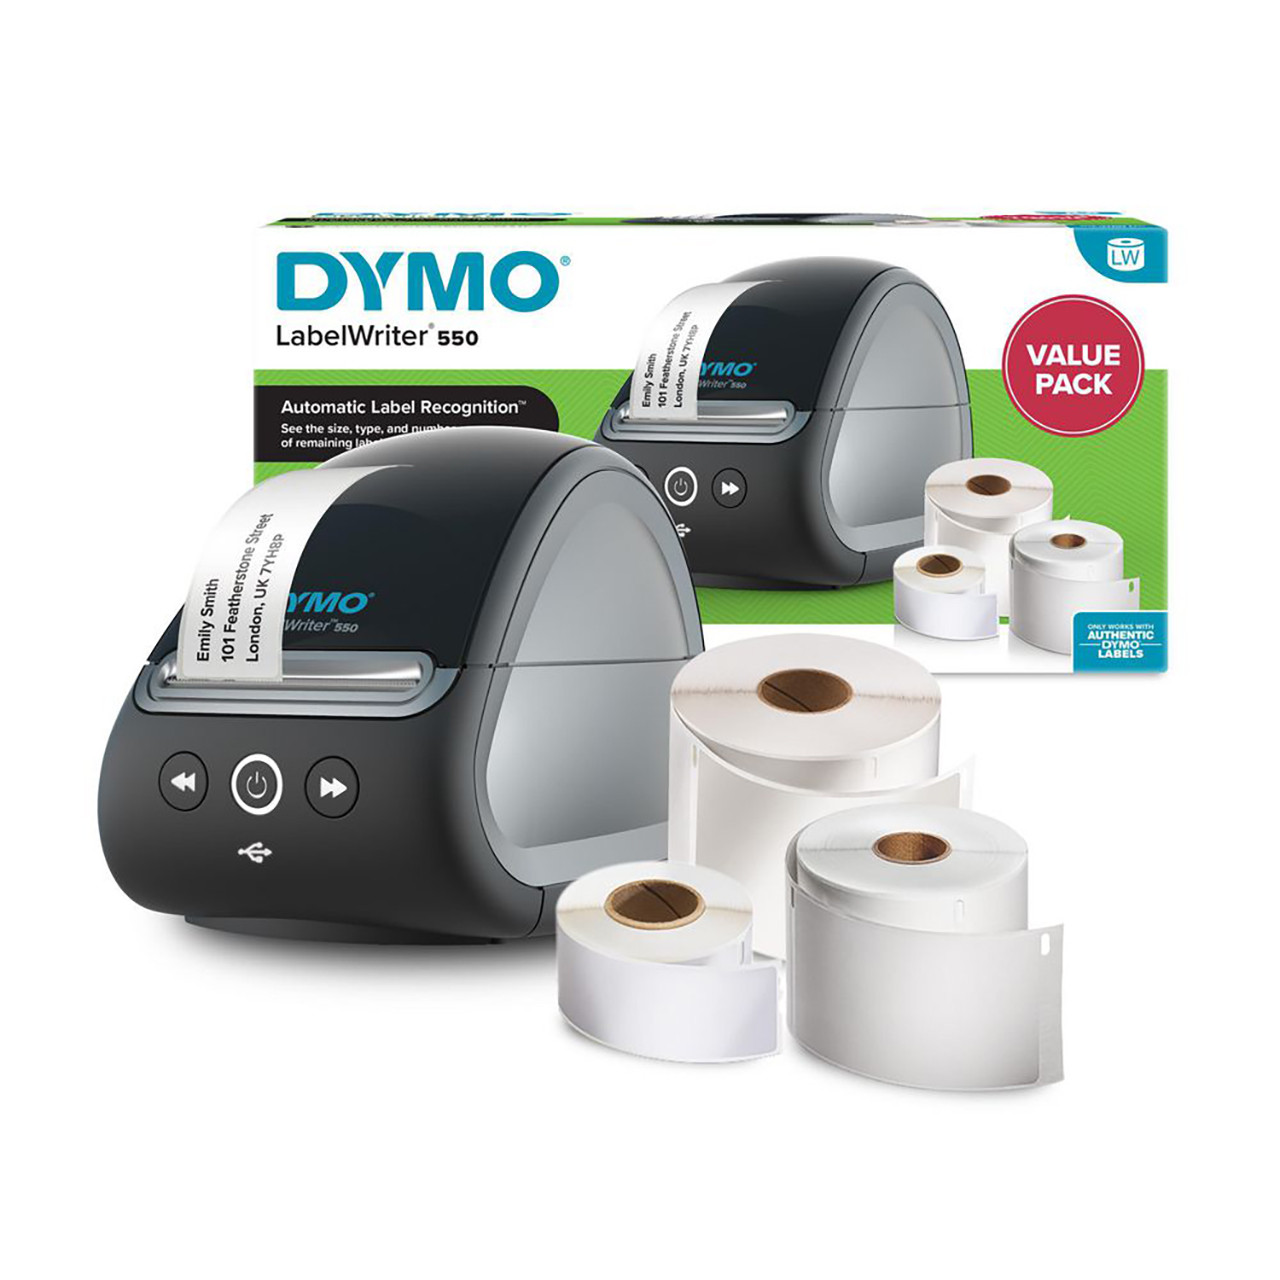 Dymo Labelwriter 450 Review - The Best Label Printer?